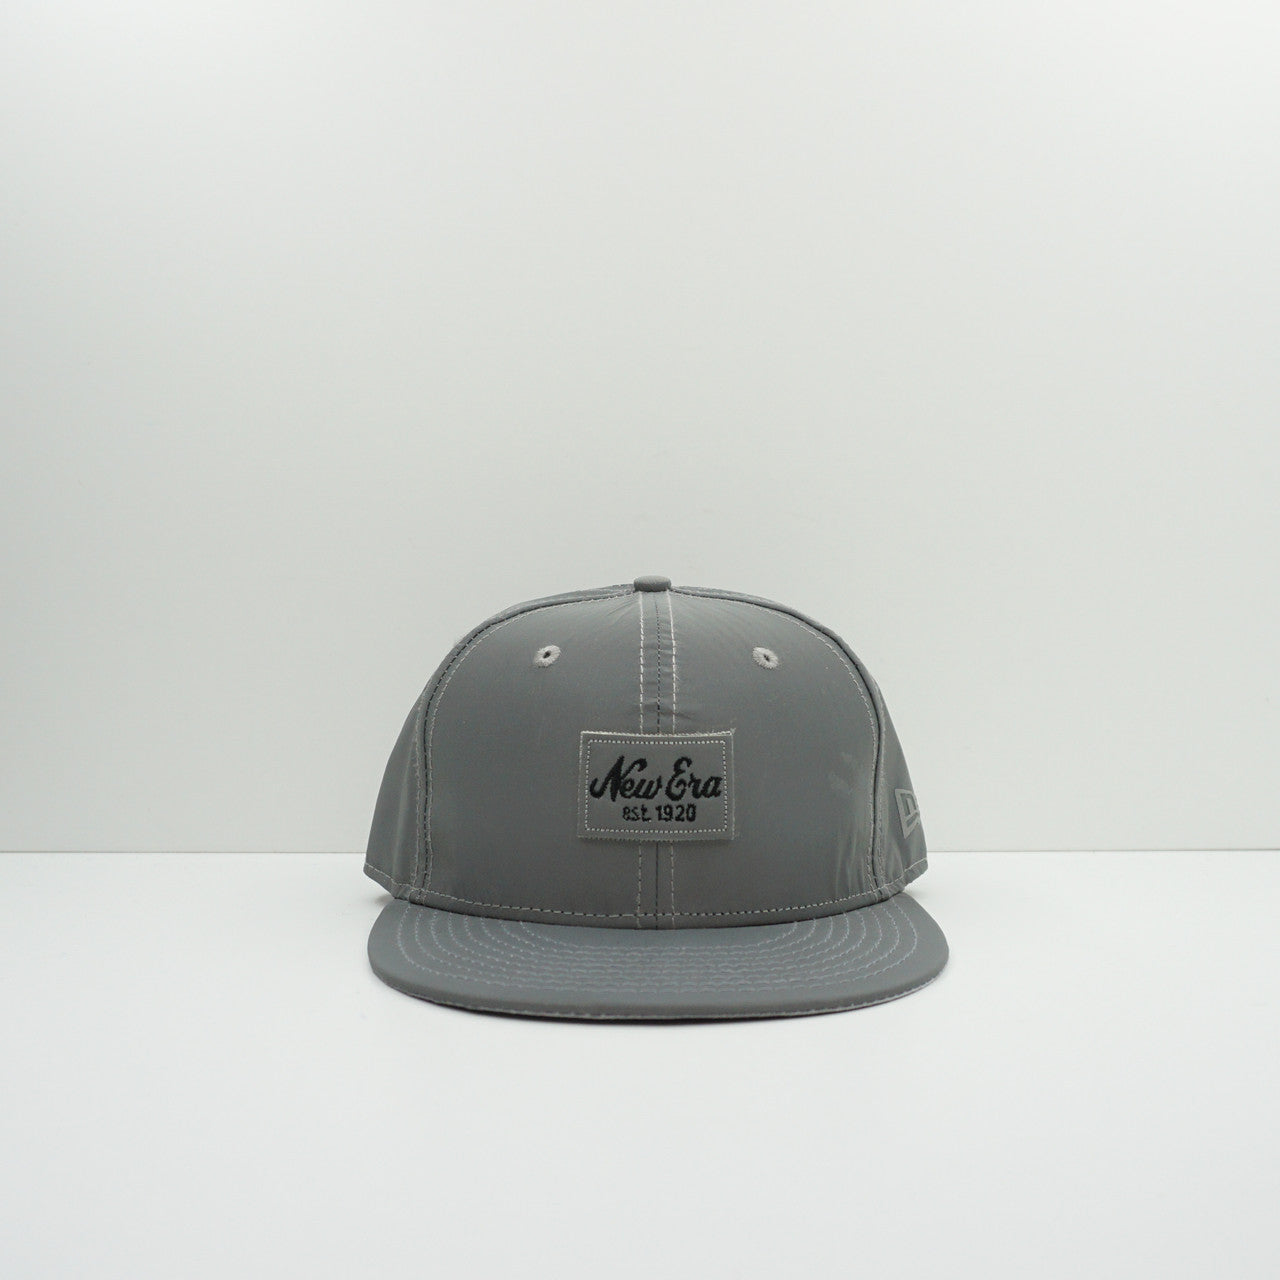 New Era Grey Reflective Fitted Cap